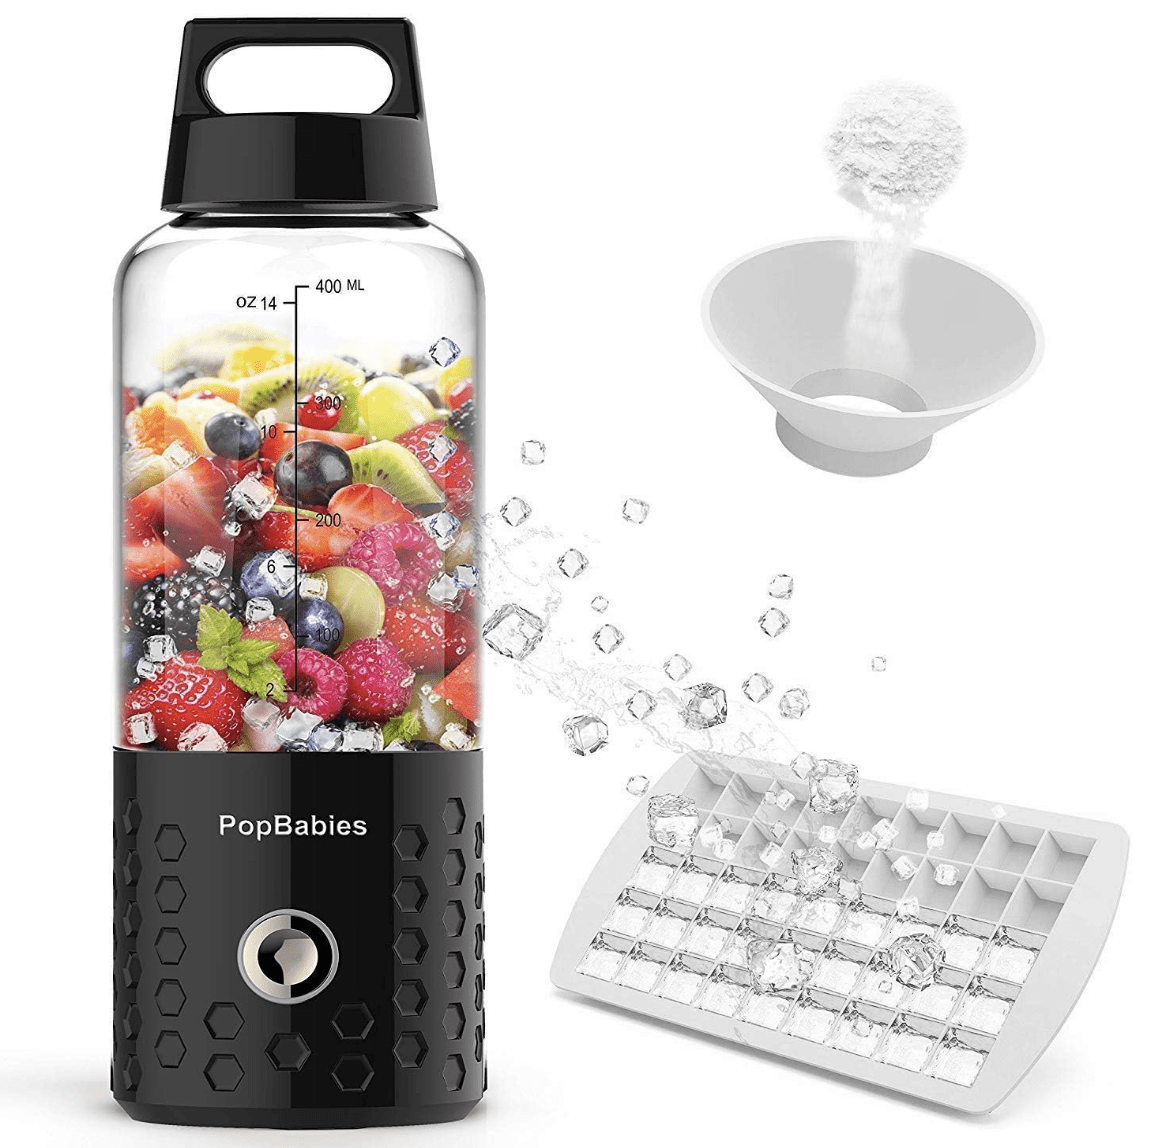 http://cdn.apartmenttherapy.info/image/upload/v1697481106/commerce/Amazon-PopBabies-Portable-Blender.png